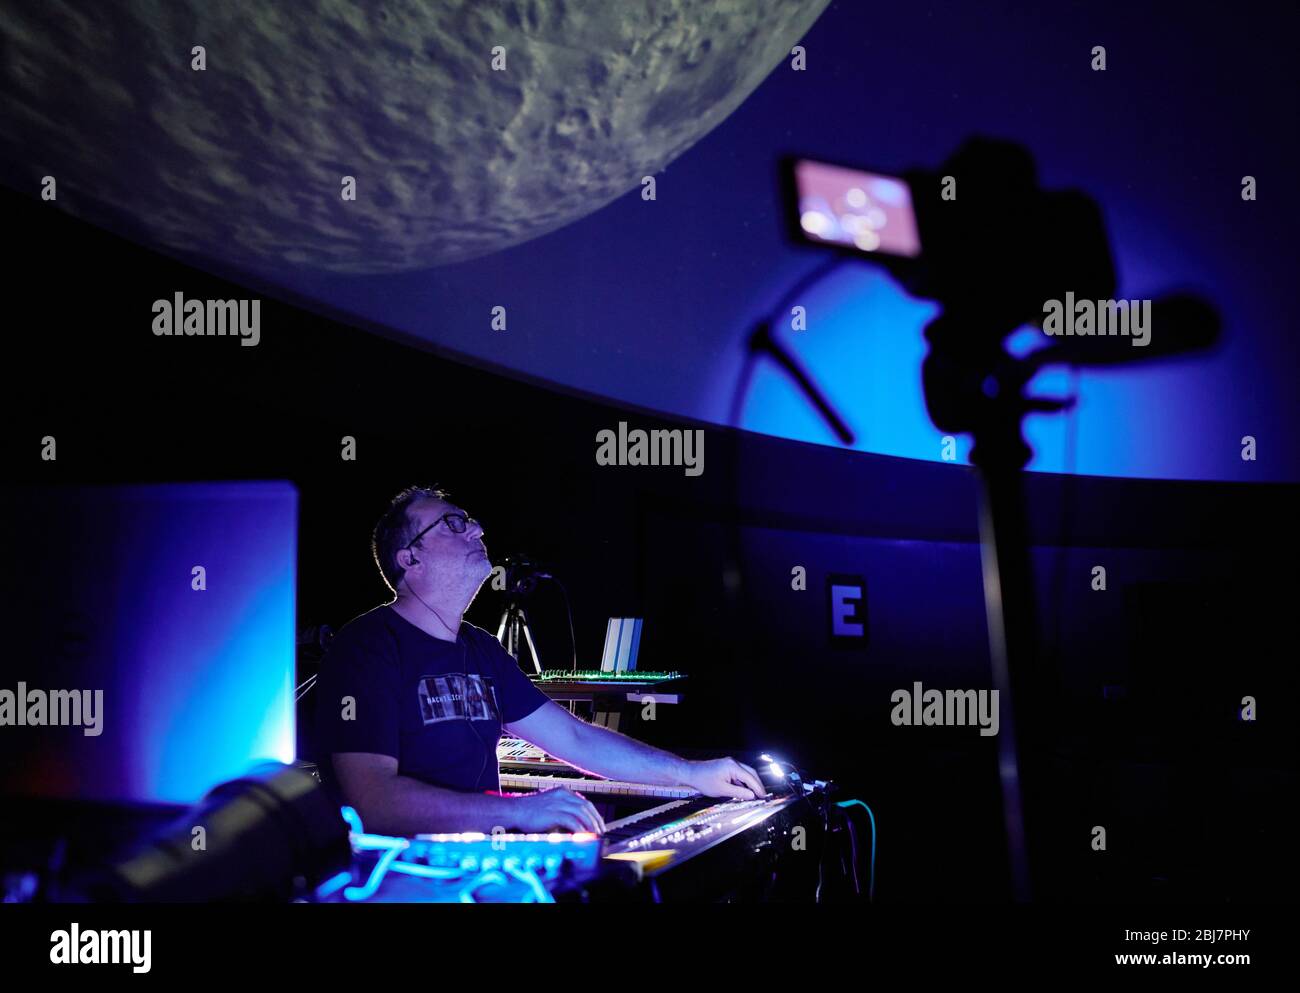 Bochum, Germany. 28th Apr, 2020. The musician Stefan Erbe plays a concert under the dome of the planetarium to present his new CD 'Nachtlichter'. Since the event originally planned for May 2nd cannot take place in front of spectators due to the corona epidemic, he recorded the concert with several cameras in advance and wants to make it available on the Internet as an online stream for the release of his 30th studio album at the time of the planned concert. Credit: Bernd Thissen/dpa/Alamy Live News Stock Photo